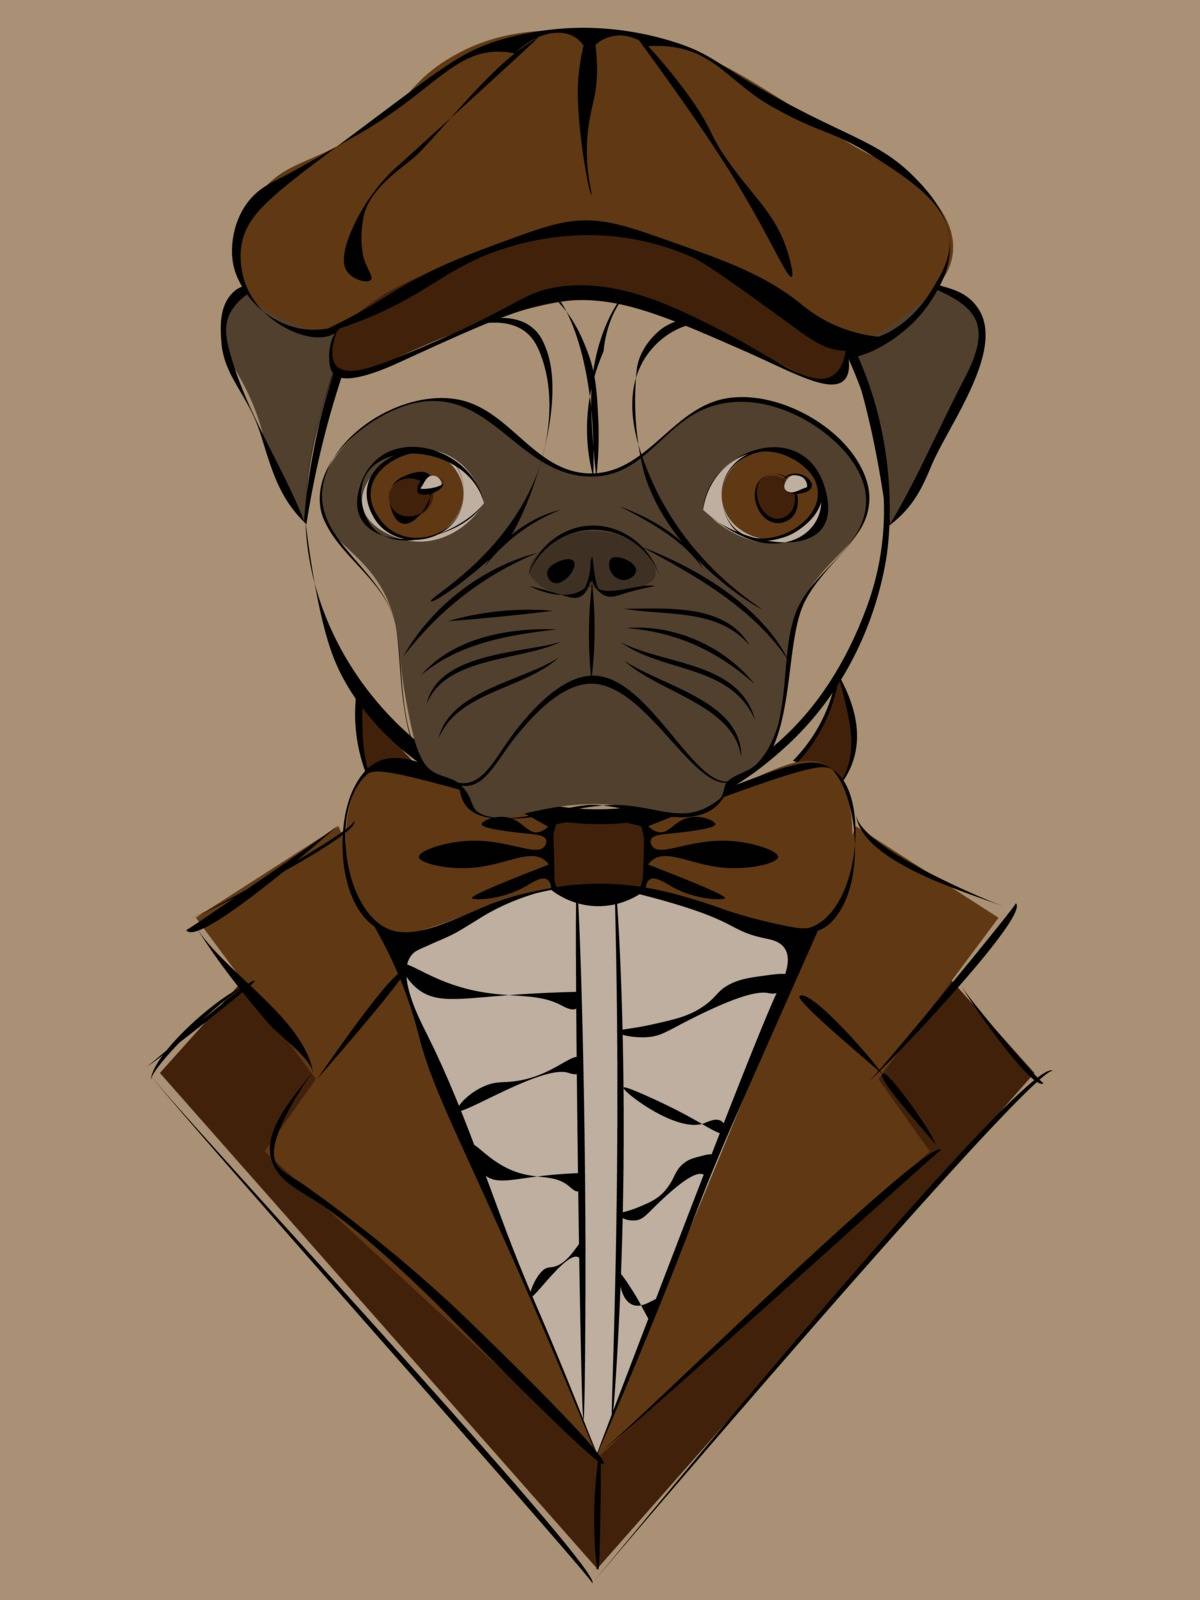 cute illustrasion with pug in old-fashioned cap and jacket by paranoido